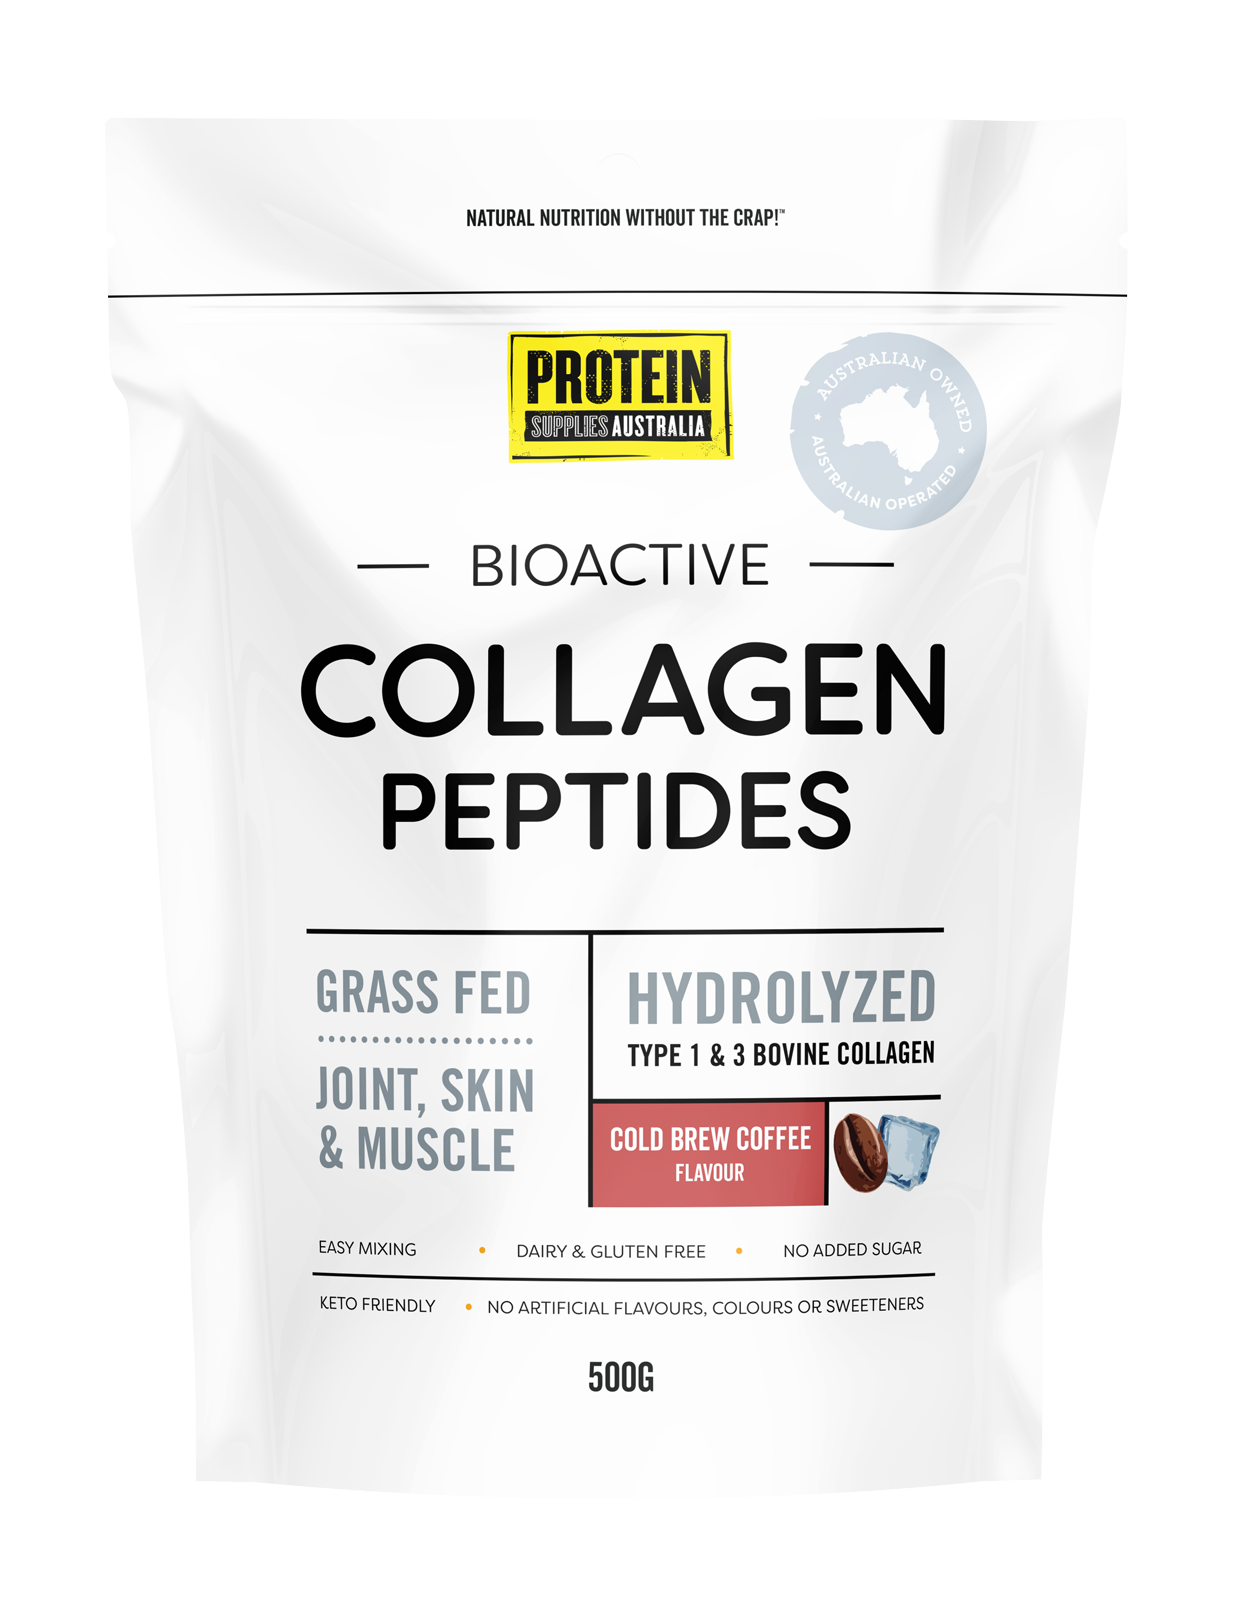 (CLEARANCE!) Protein Supplies Australia Collagen Cold Brew Coffee